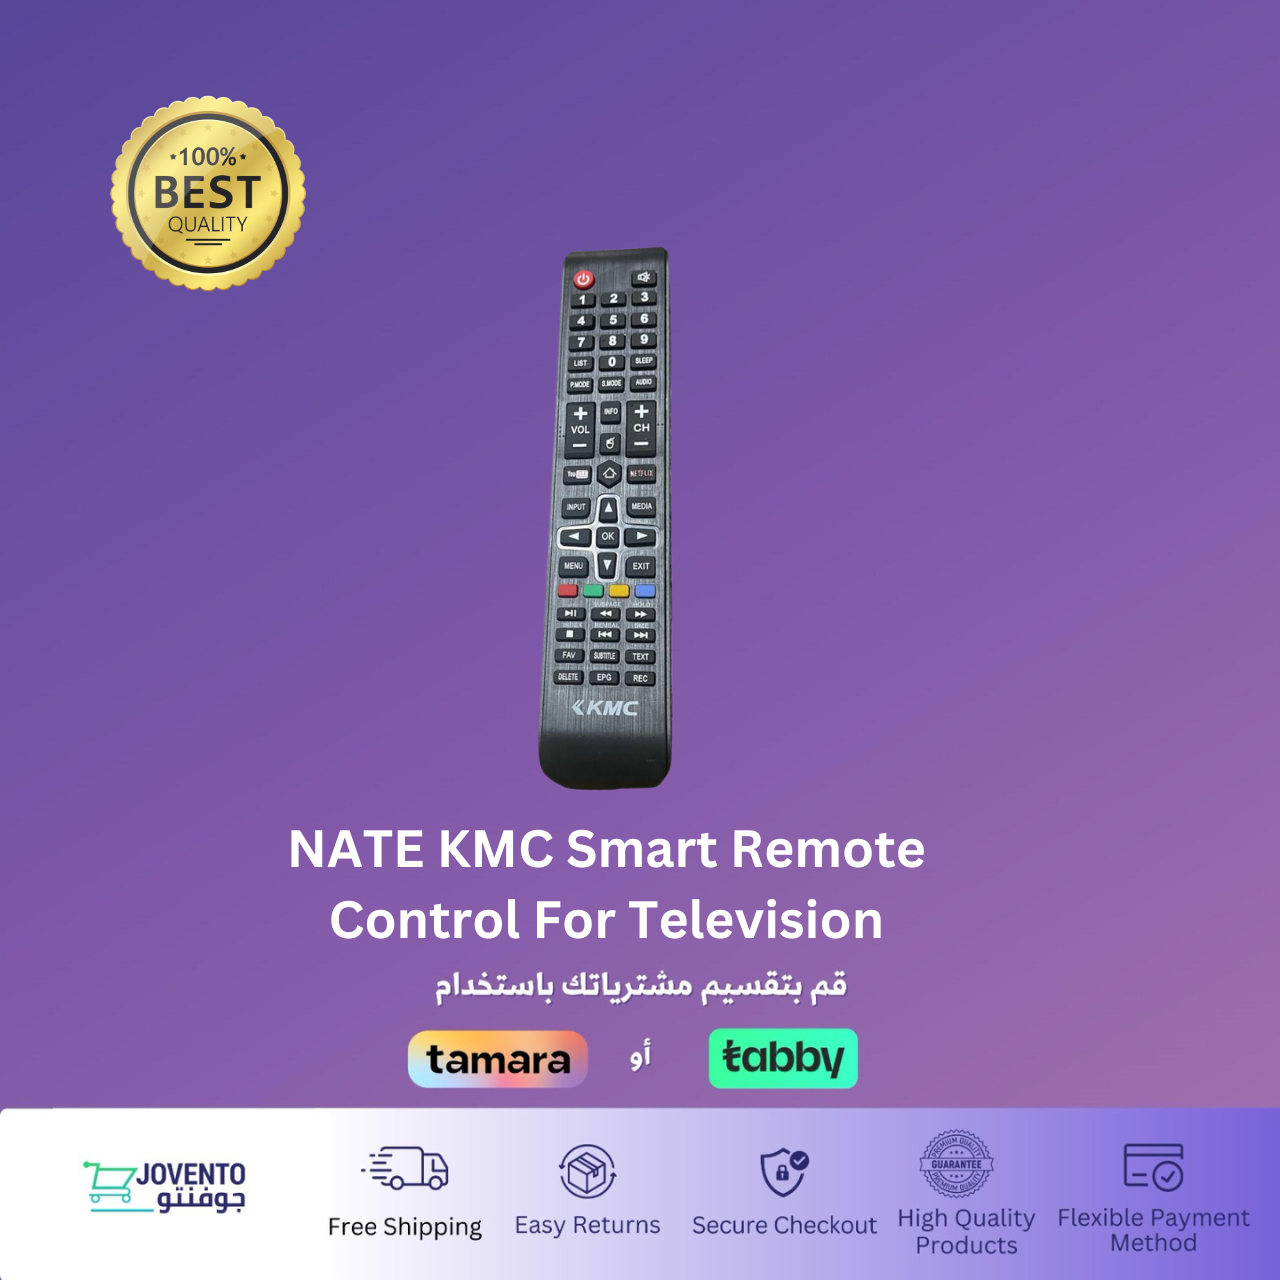 NATE KMC Smart Remote Control For Television